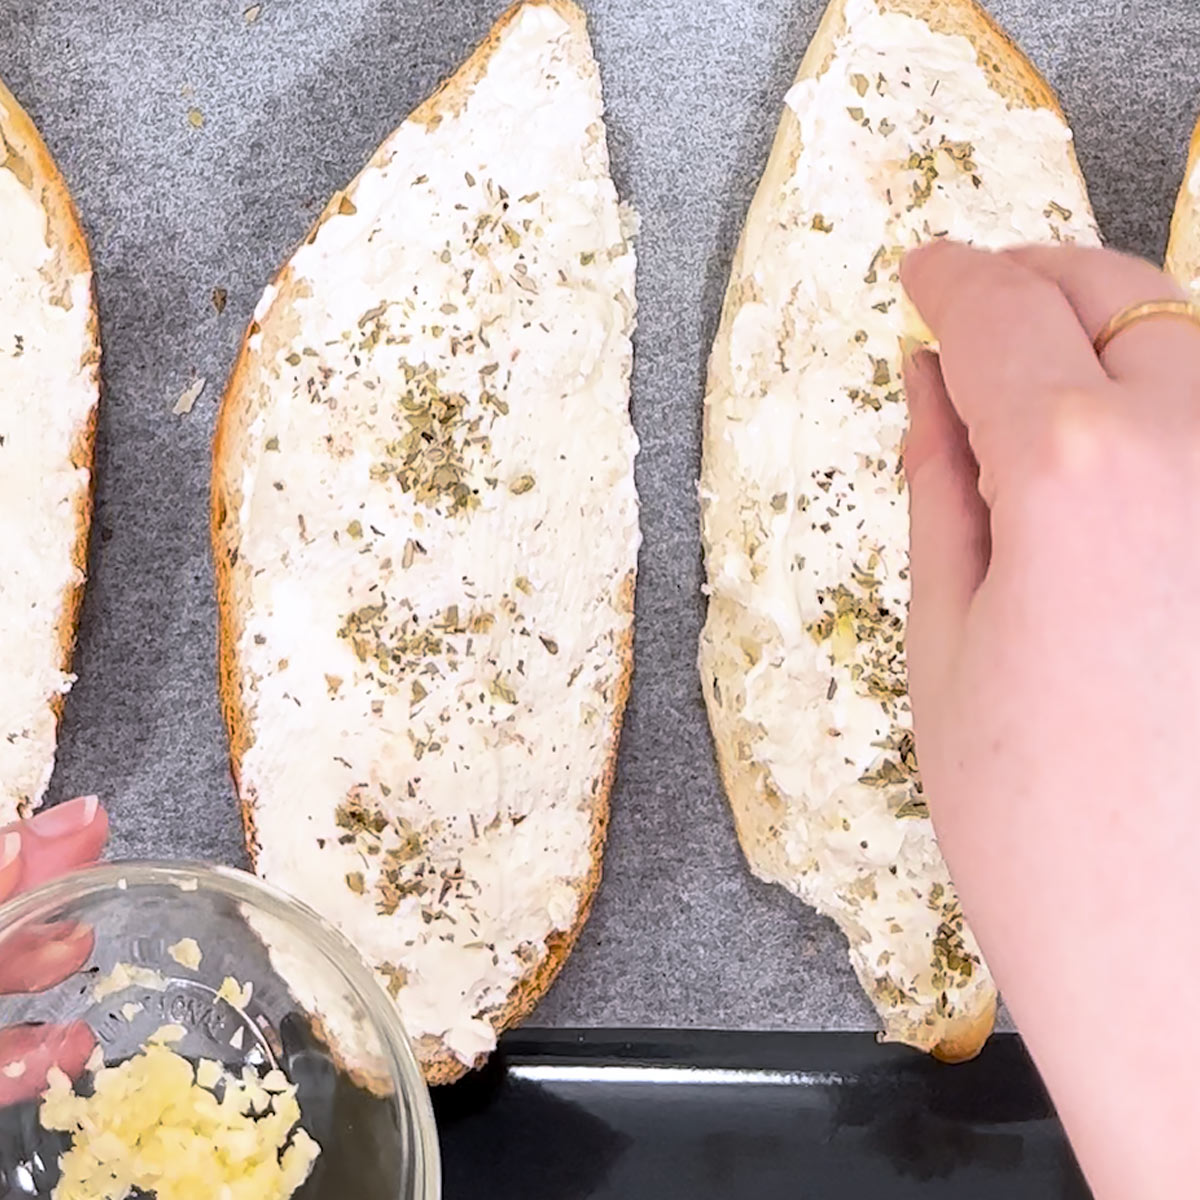 top french bread with seasoning and garlic